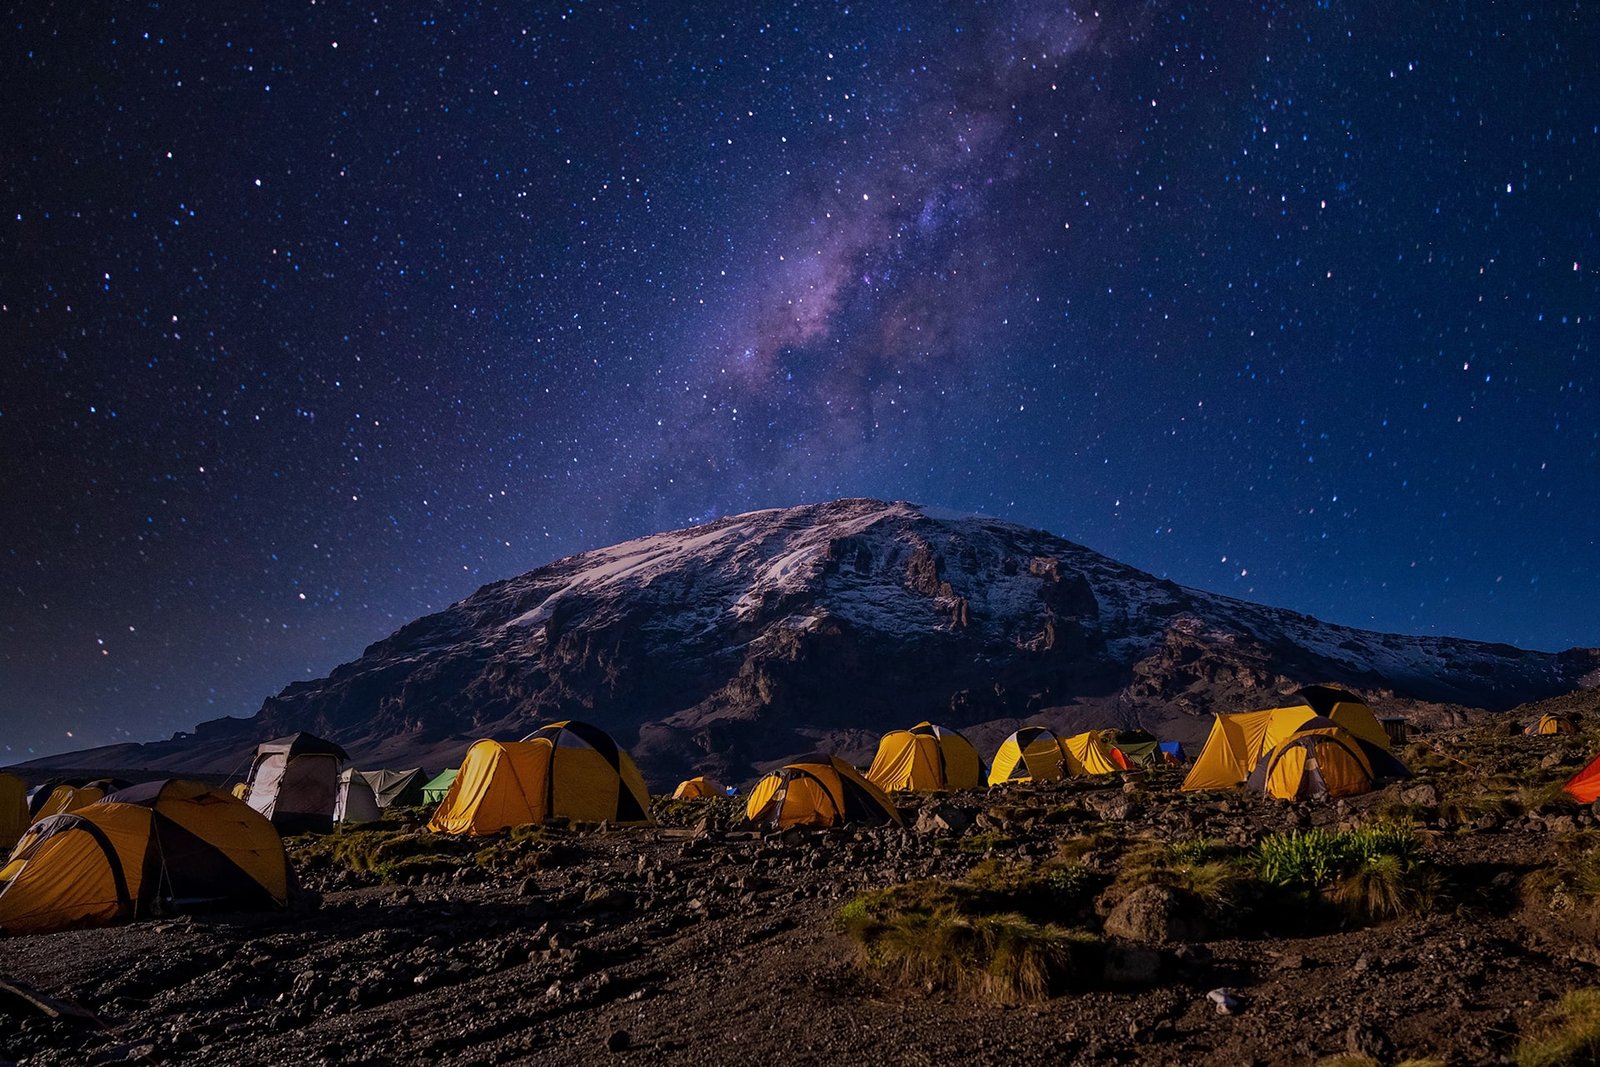 Mount Kilimanjaro It is the highest mountain in Africa and the highest single free-standing mountain above sea level in the world: 5,895 metres (19,341 ft) above sea level and .